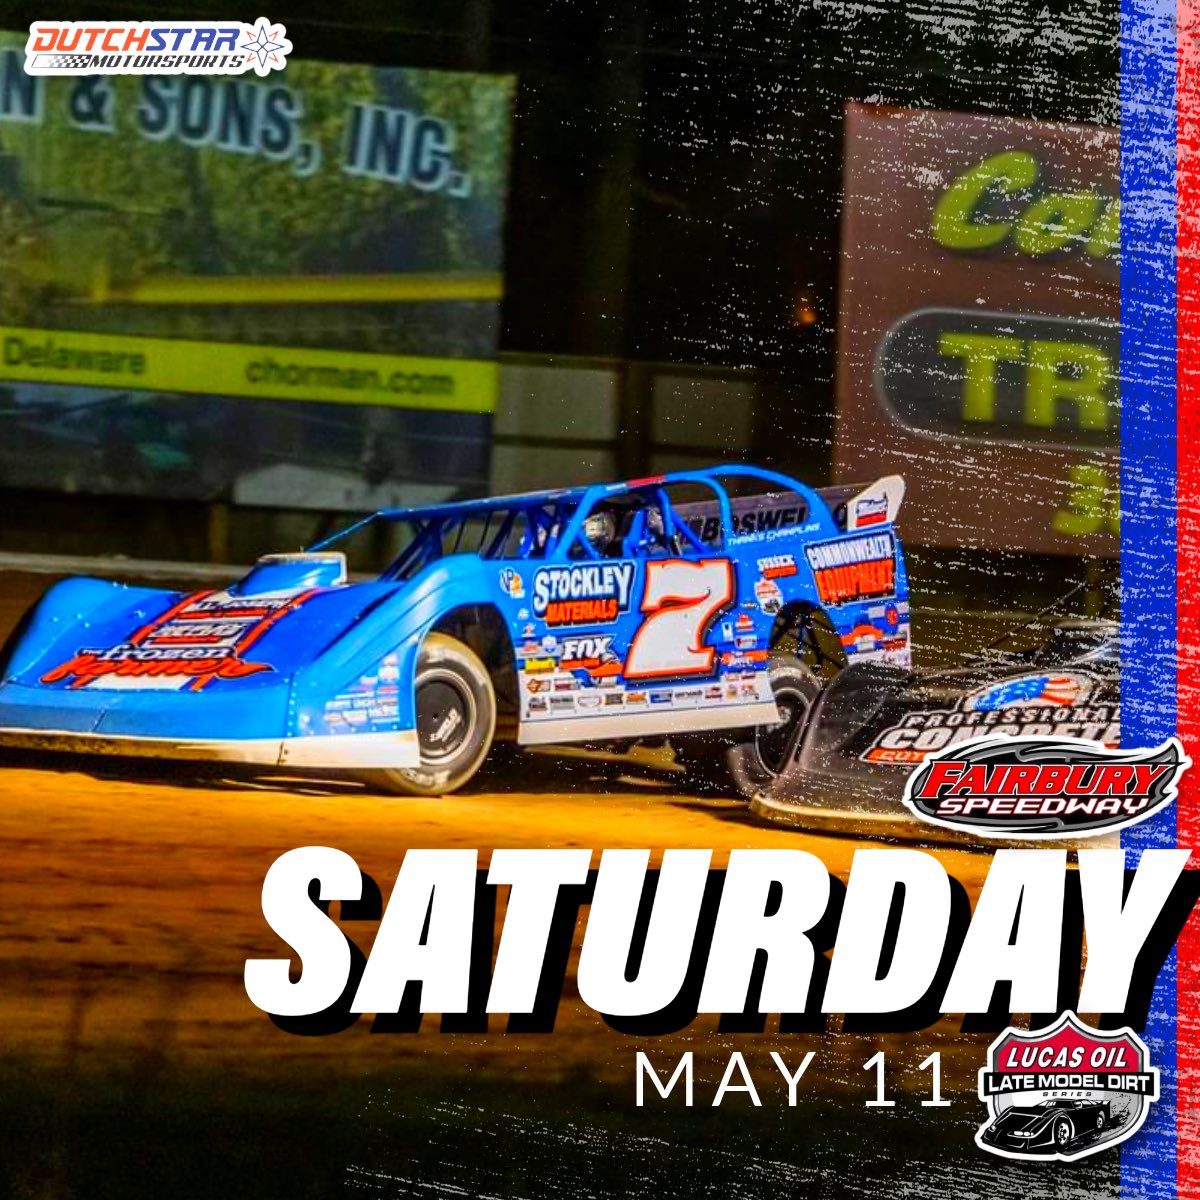 🏁Tonight we head to Fairbury American Legion Speedway for the @lucasdirt $30,000 to win main event, which is preceded by a complete program of Dirt Draft Hot Laps, Allstar Performance Time Trials, Heat Races, and B-Mains. 🕕Hot Laps at 6:00PM CT 📺 @FloRacing 📱 @MyRacePass